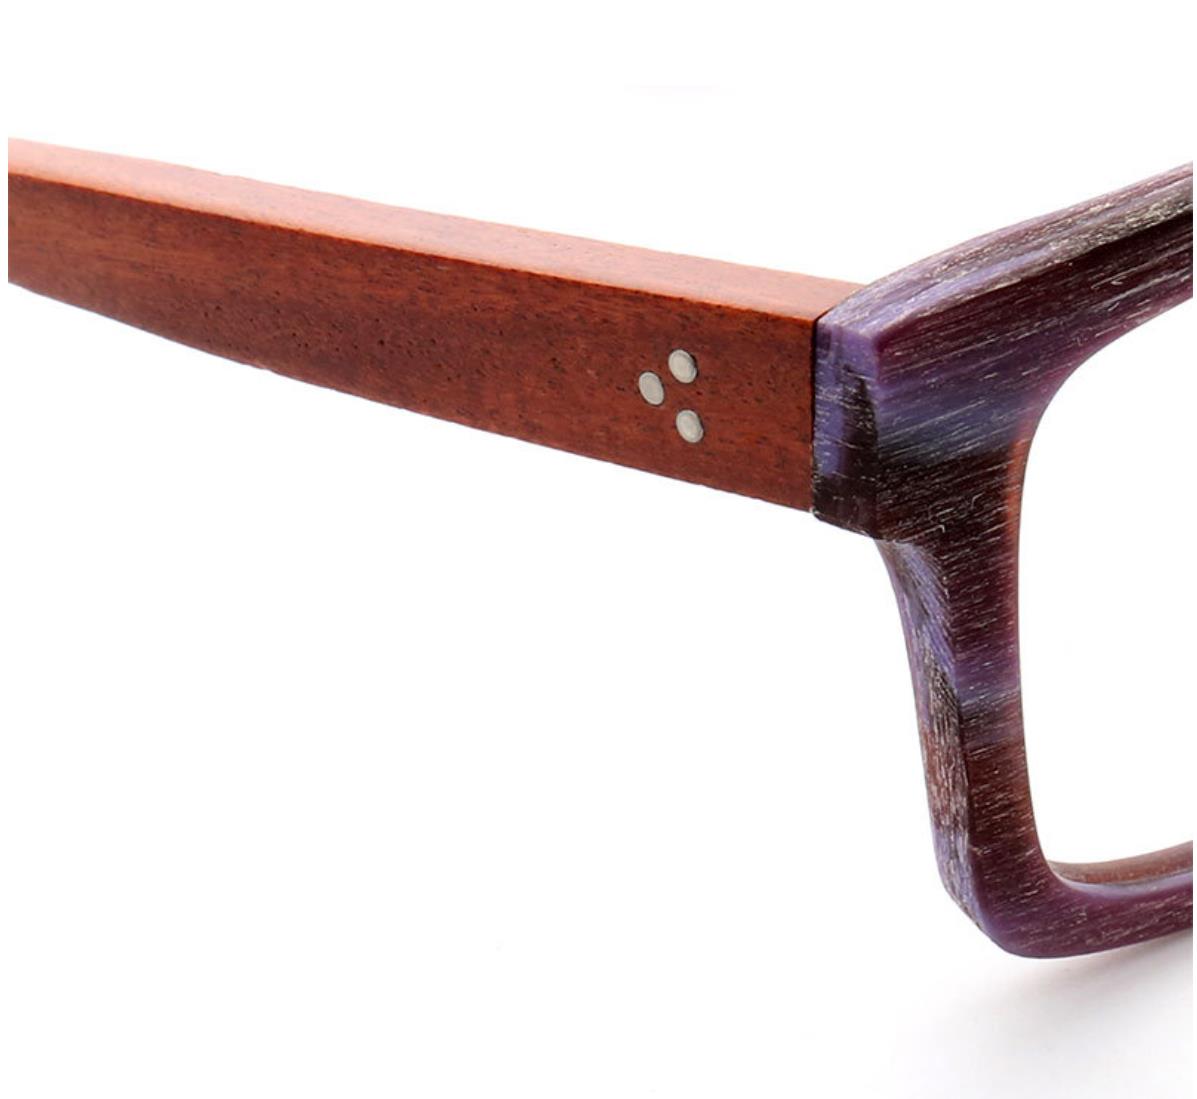 Temple of multicolored wooden eyeglass frames